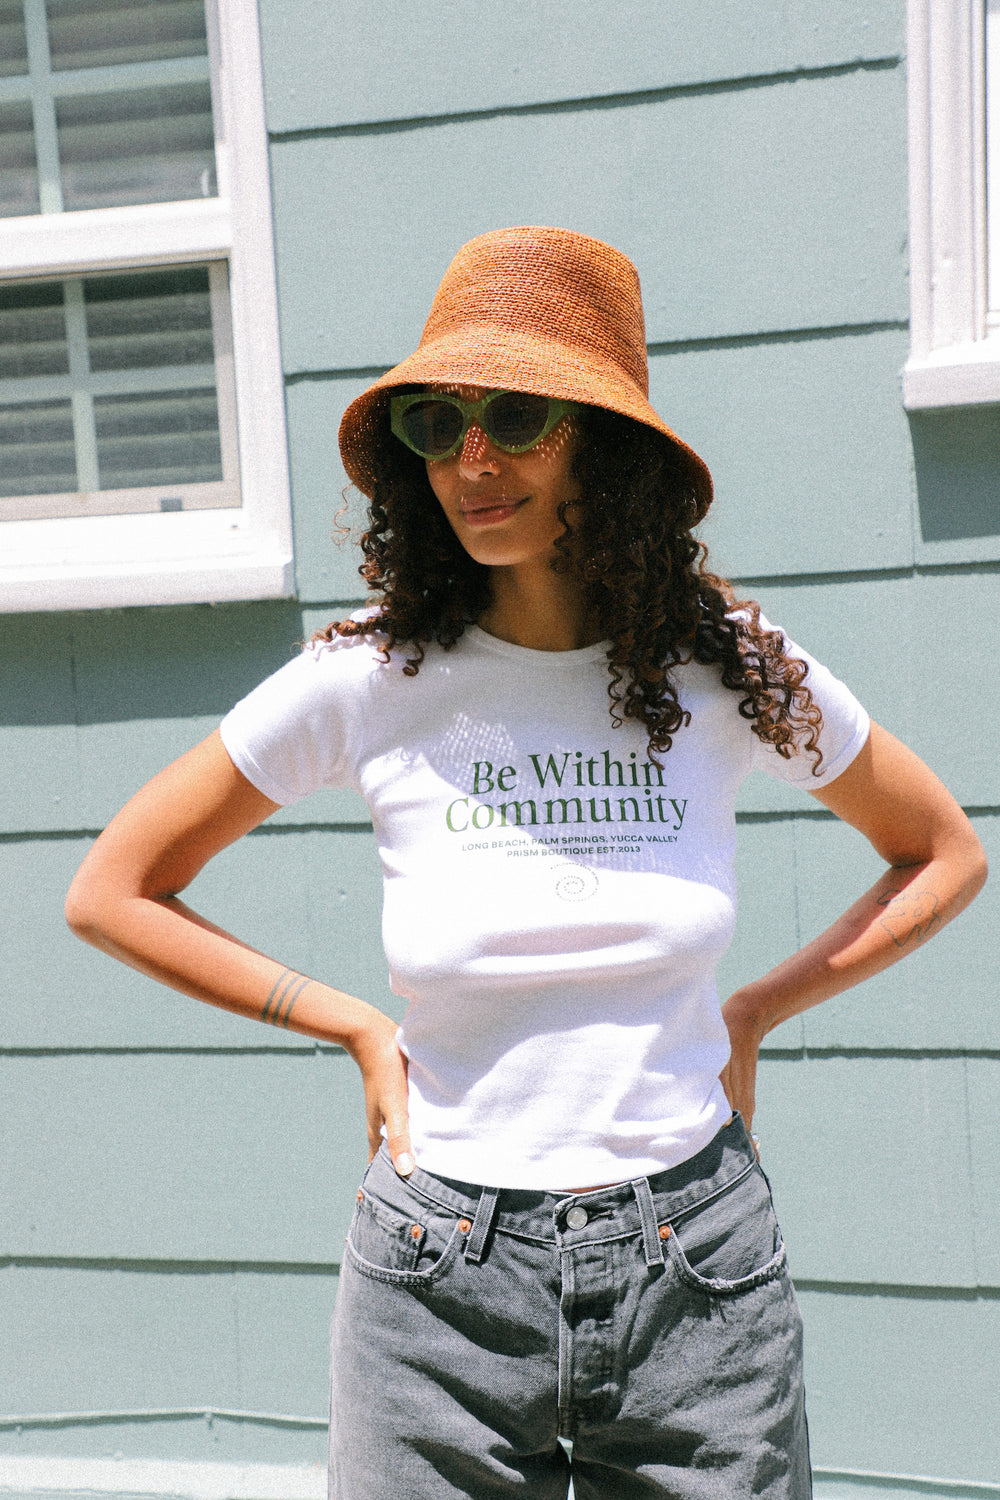 Within Community Tee